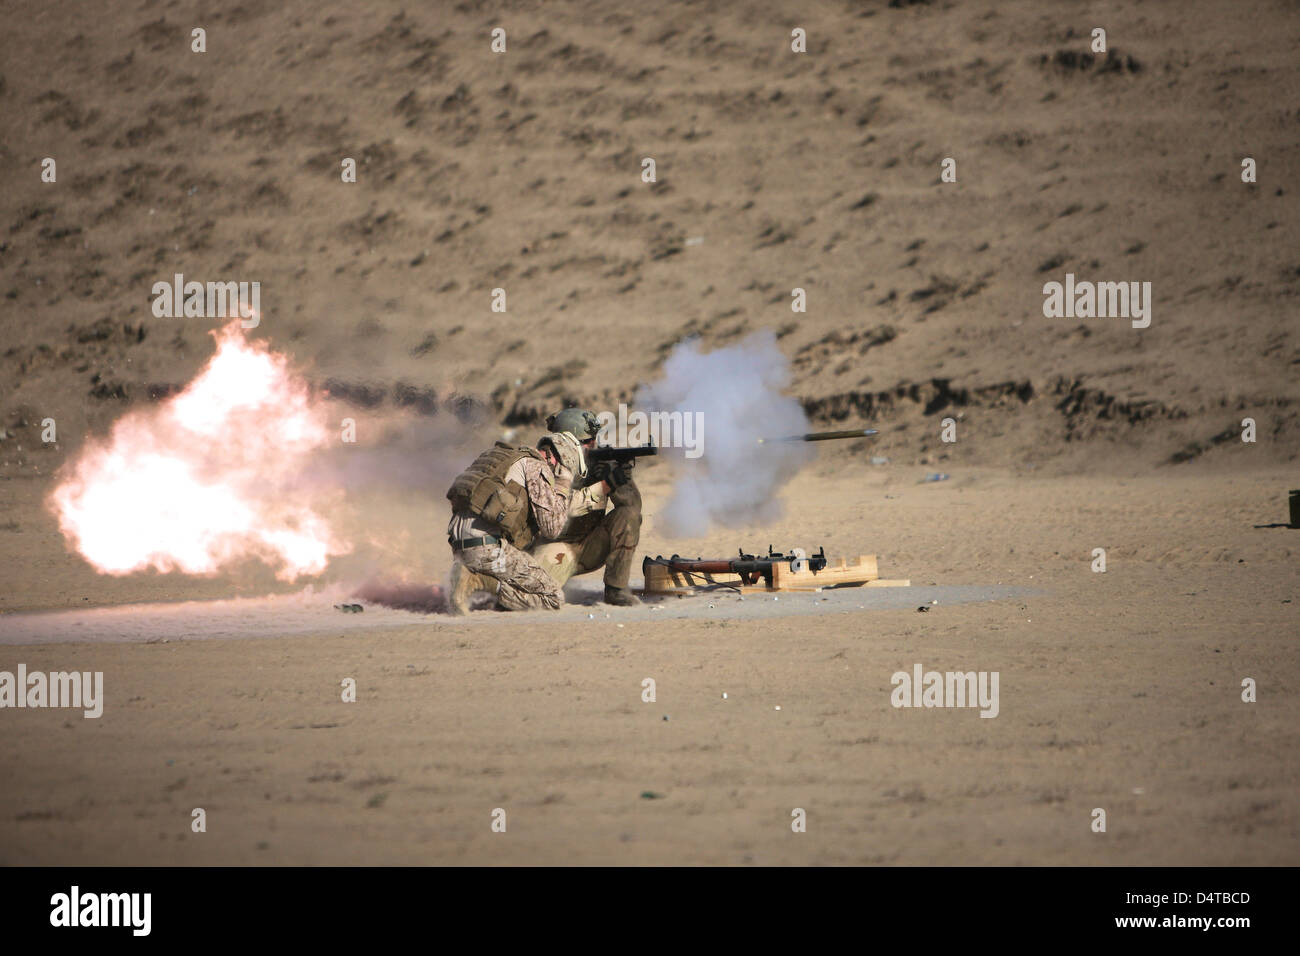 A soldier fires a rocket-propelled grenade launcher. Stock Photo